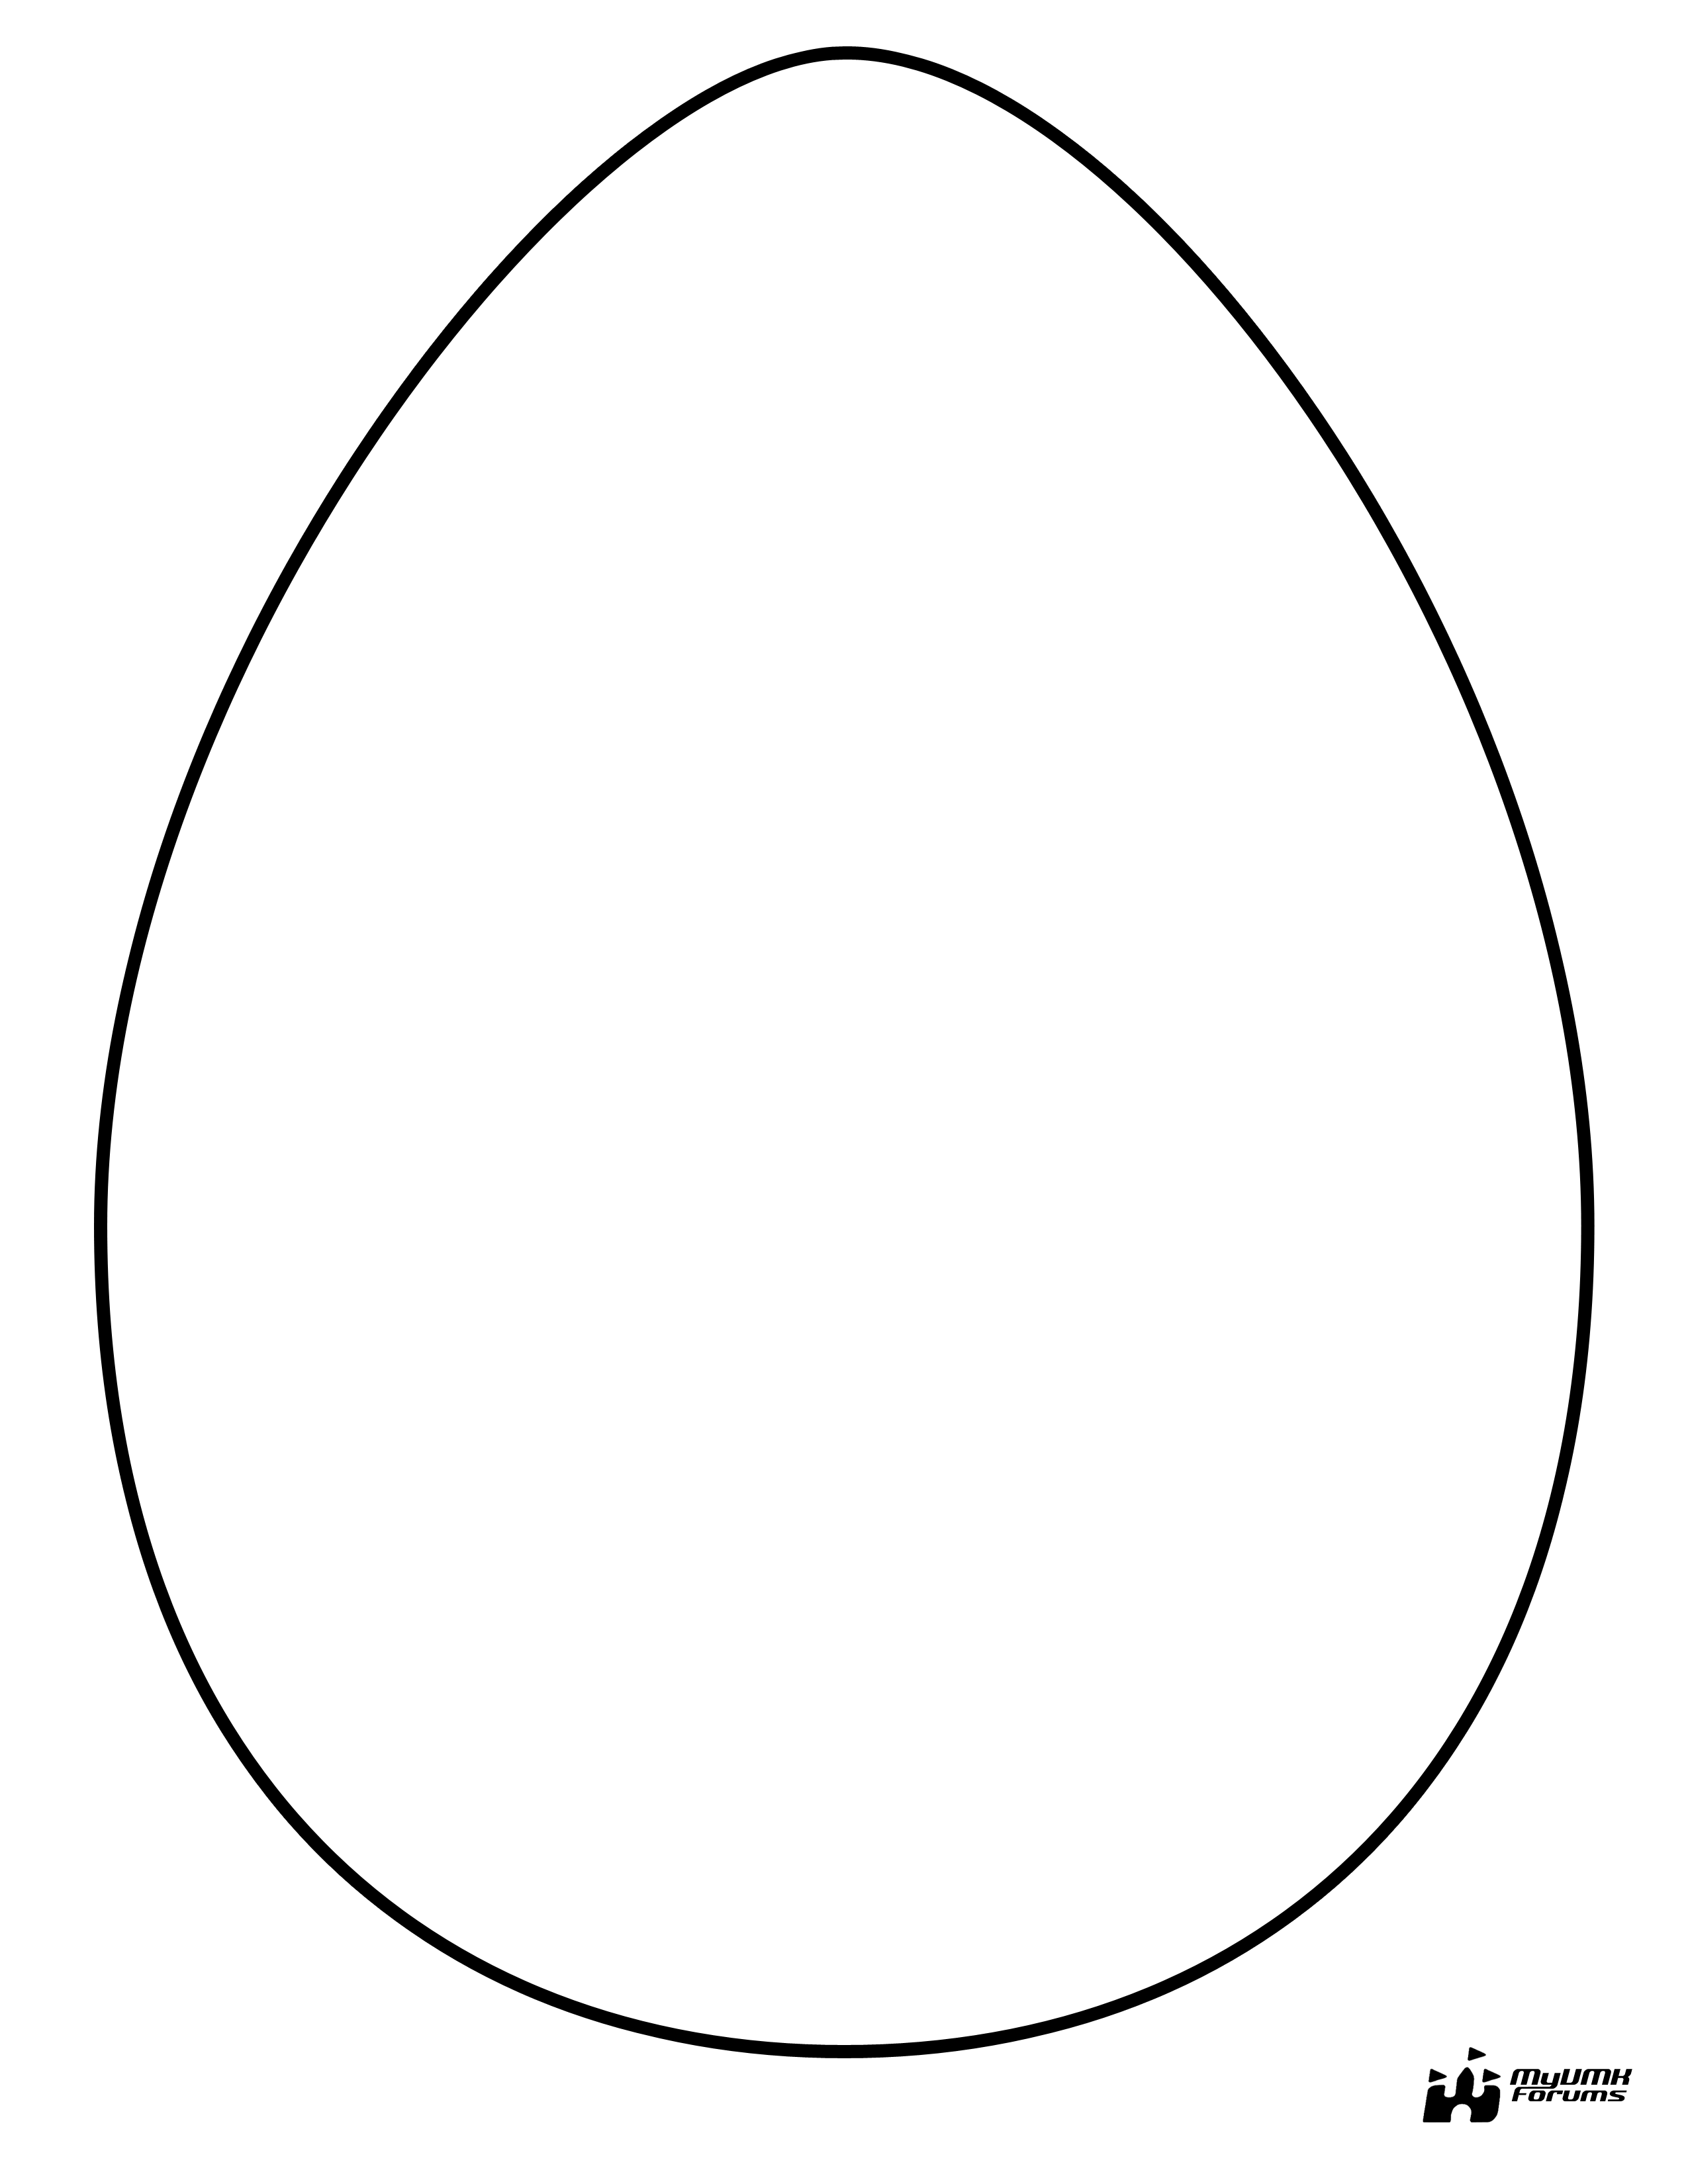 7 Easter Egg Template Printable Images - Easter Egg Template, Easter Egg Cut Out Template to Print and Printable Easter Card Templates / Newdesignfile.com